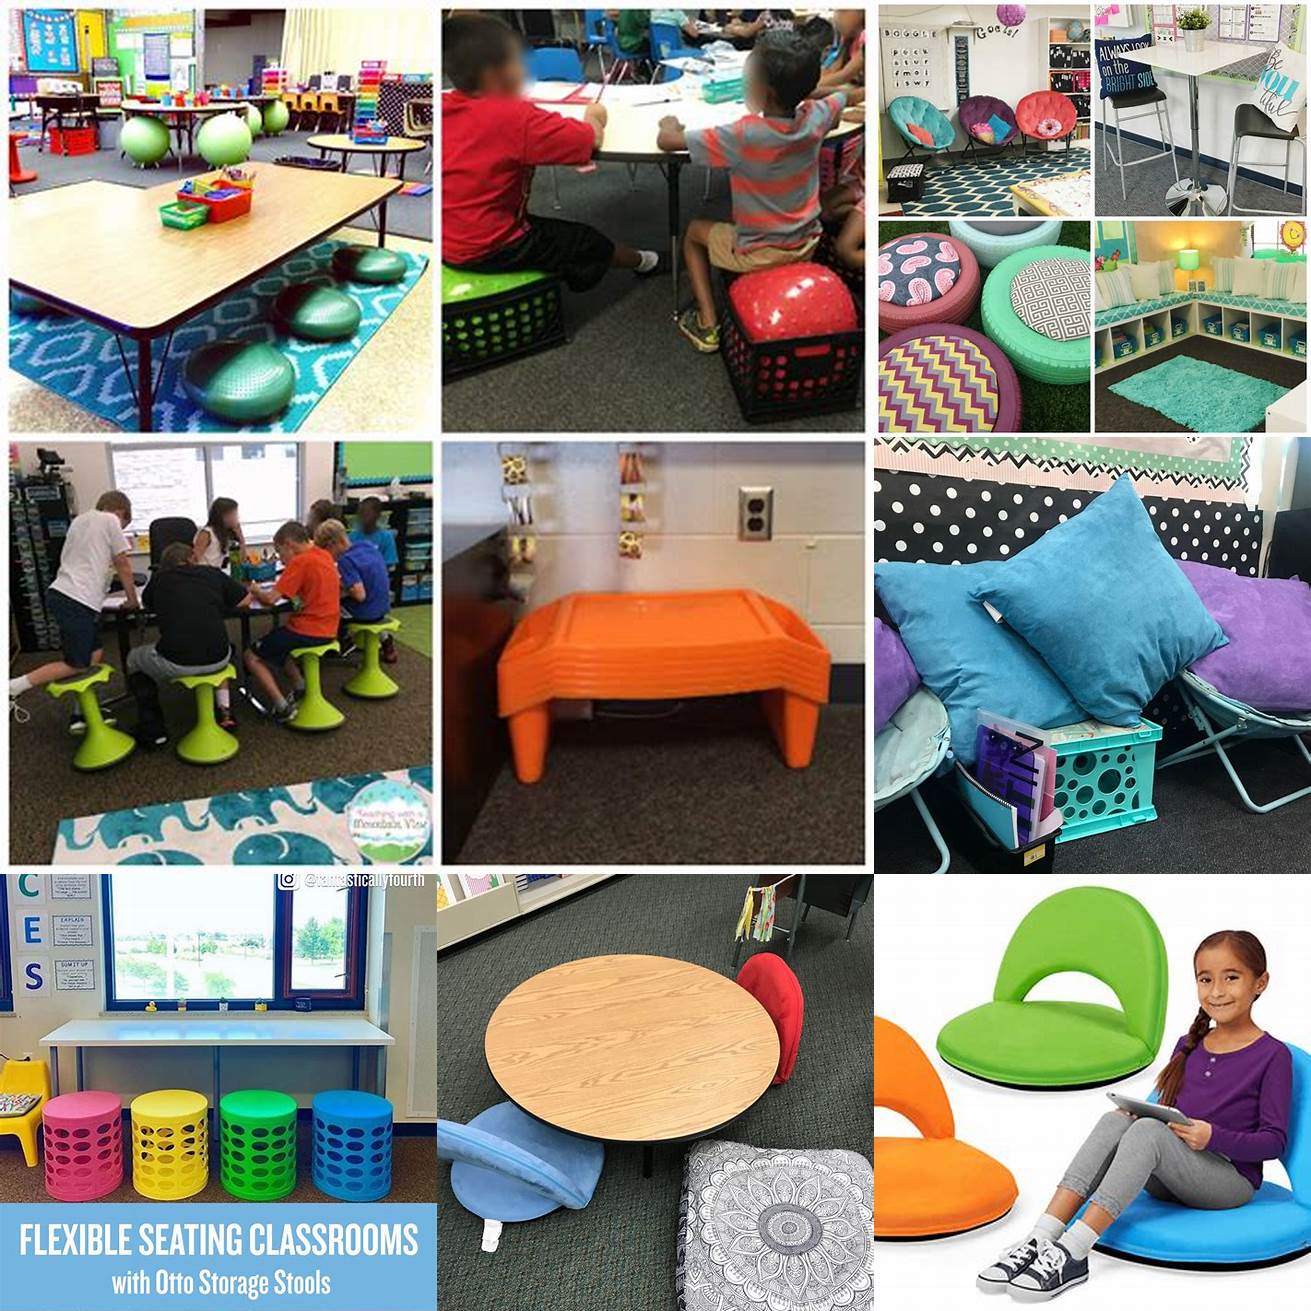 5 Flexible seating options